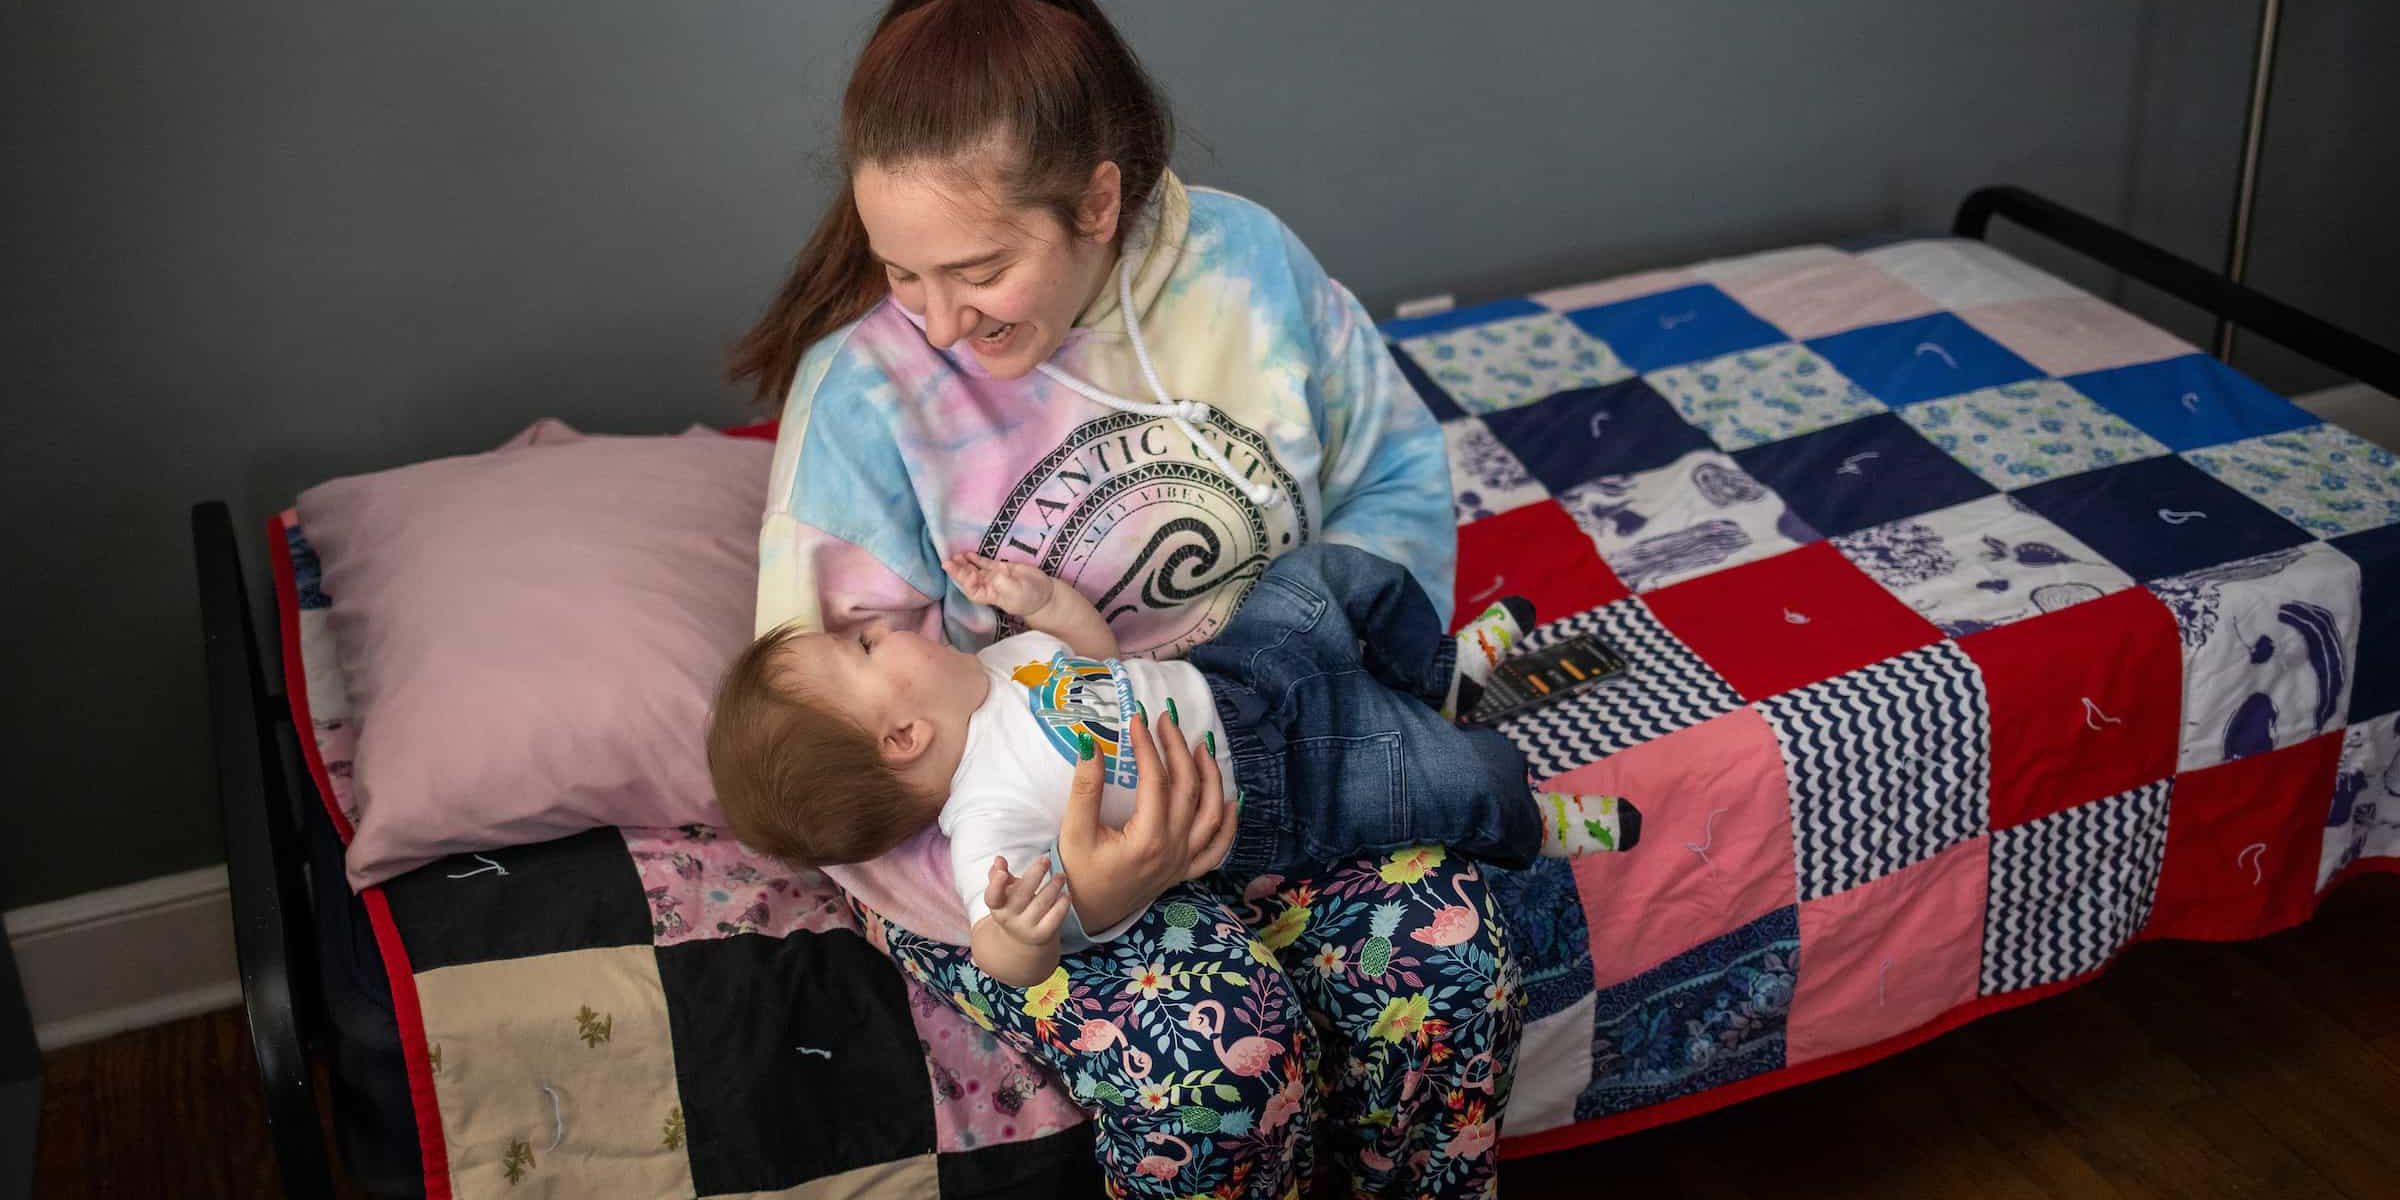 Family room is a haven of hope at LifePath Women and Children’s Shelter